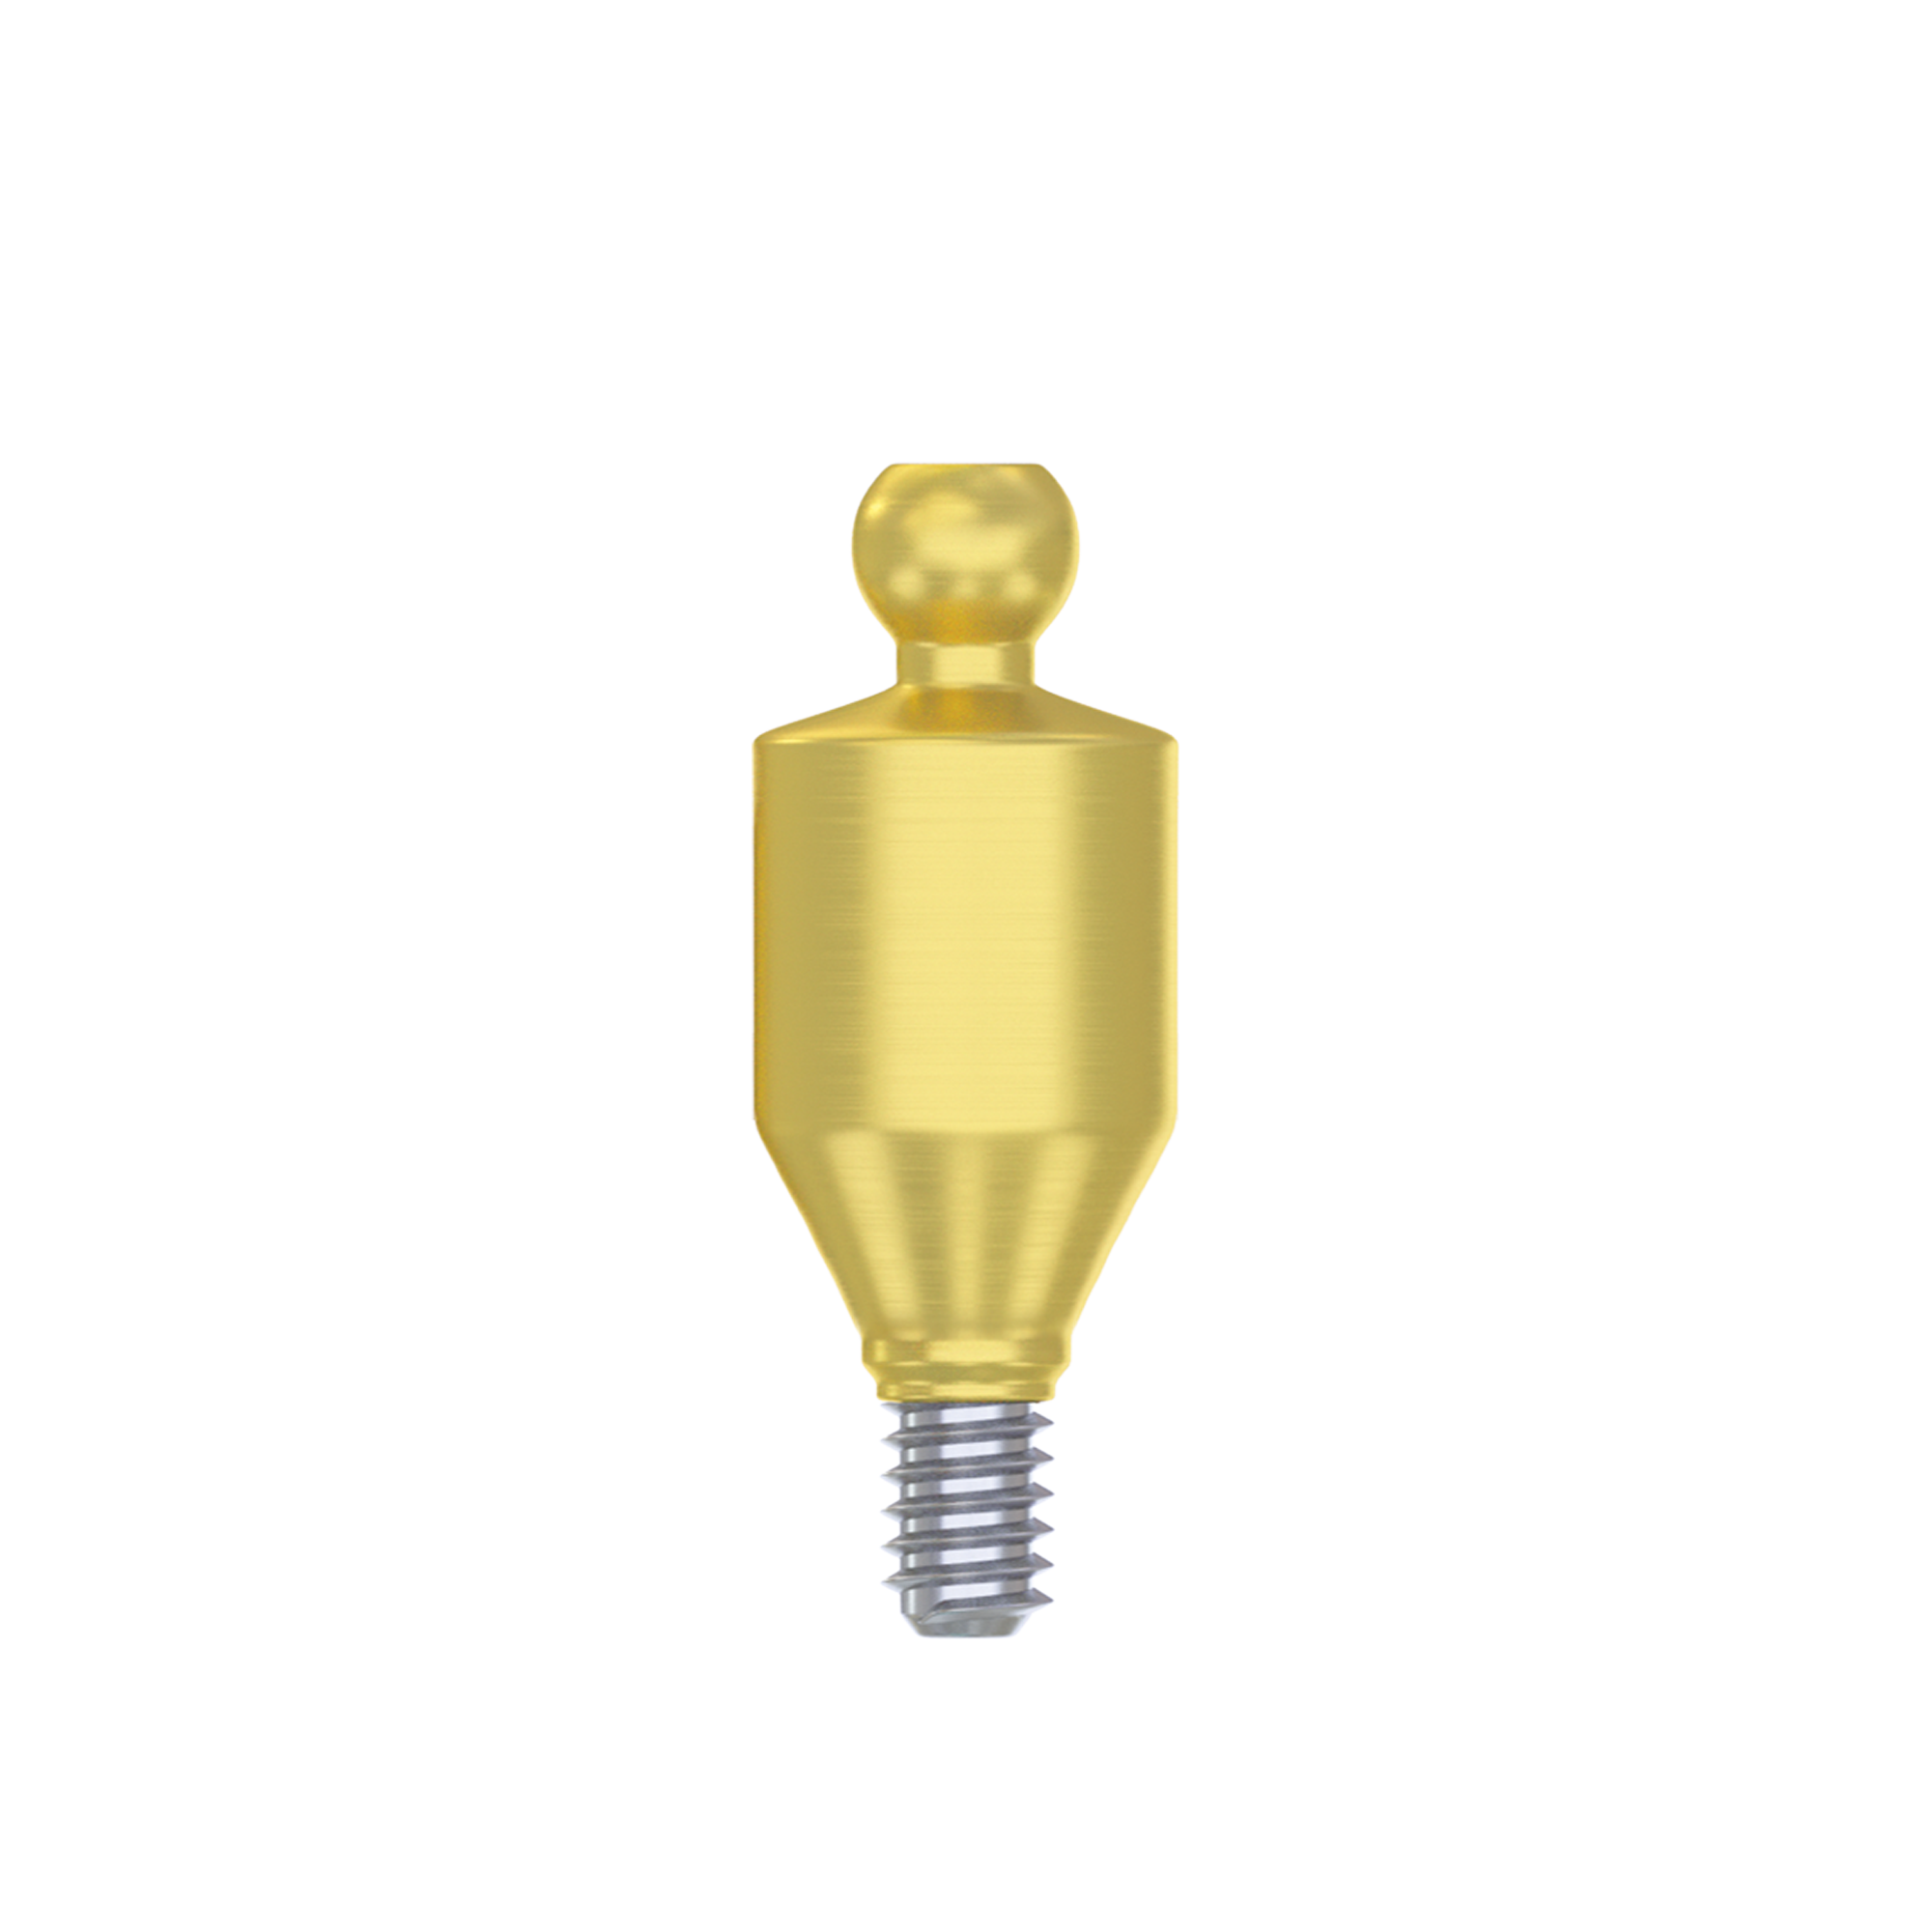 DSI Straight Ball Attachment 5.0mm  - Conical Connection RP Ø4.3-5.0mm